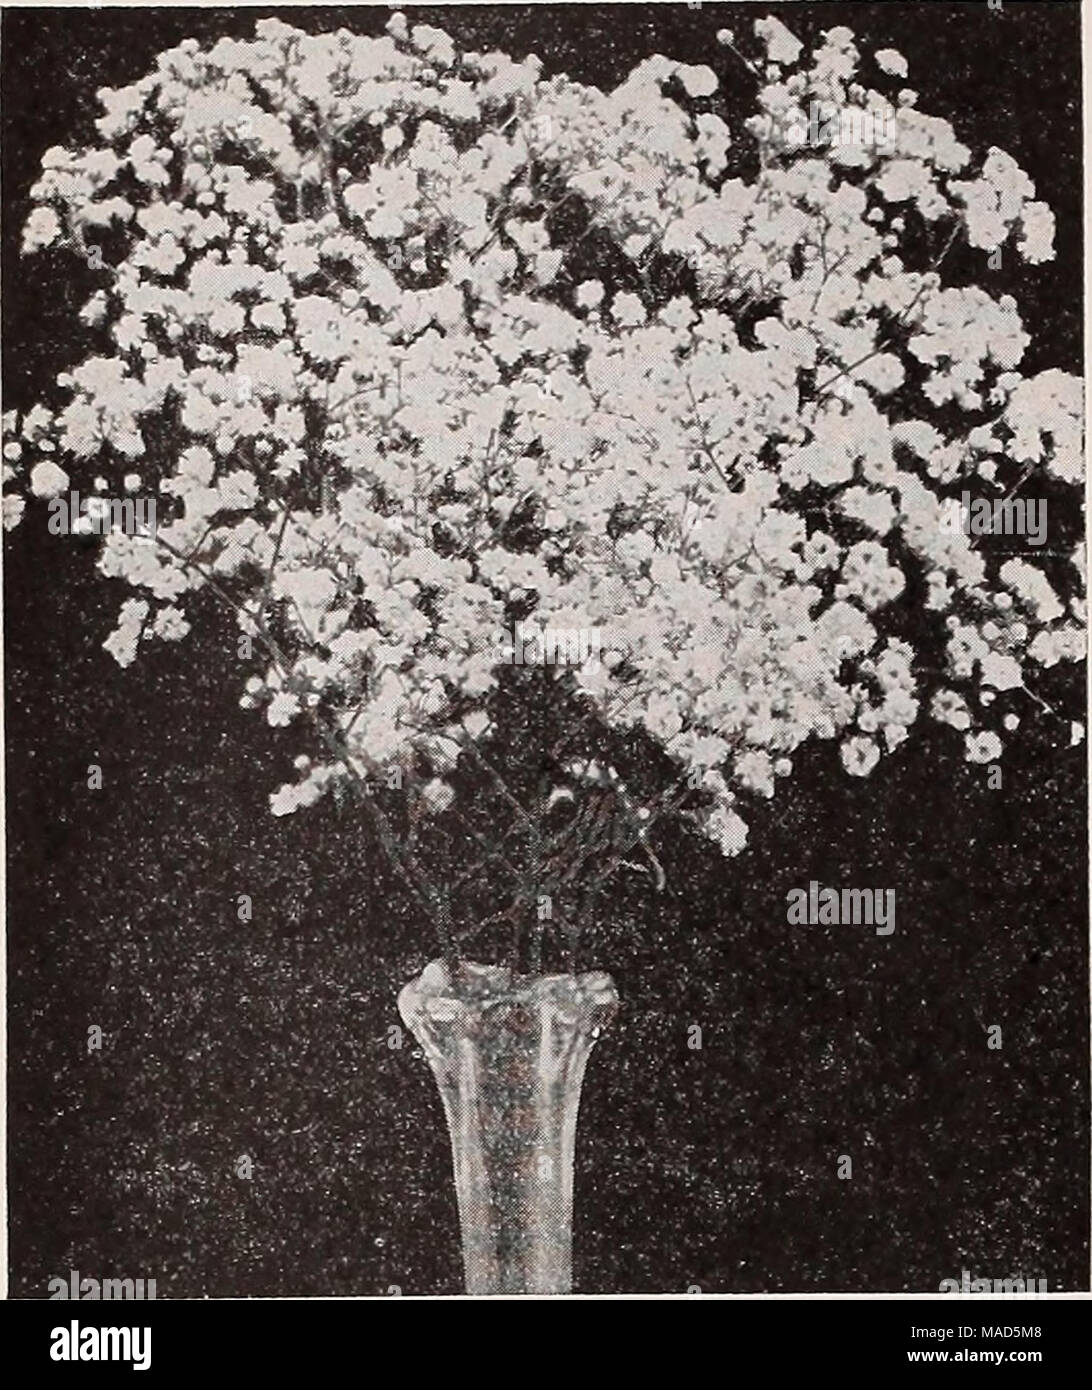 . Dreer's wholesale catalog for florists : autumn 1938 edition . Double Gypsophila Bristol Fairy Gypsophila—Baby's Breath Bristol Fairy. A splendid double-flowering variety. Strong, 2-year, field-grown plants, $3.50 per doz.; $25.00 per 100. Fauiculata flore pleno. Strong, field-grown, flowering roots of this desirable double-flowering form of Baby's Breath. $3.50 per doz.; $25.00 per 100. Stock Photo